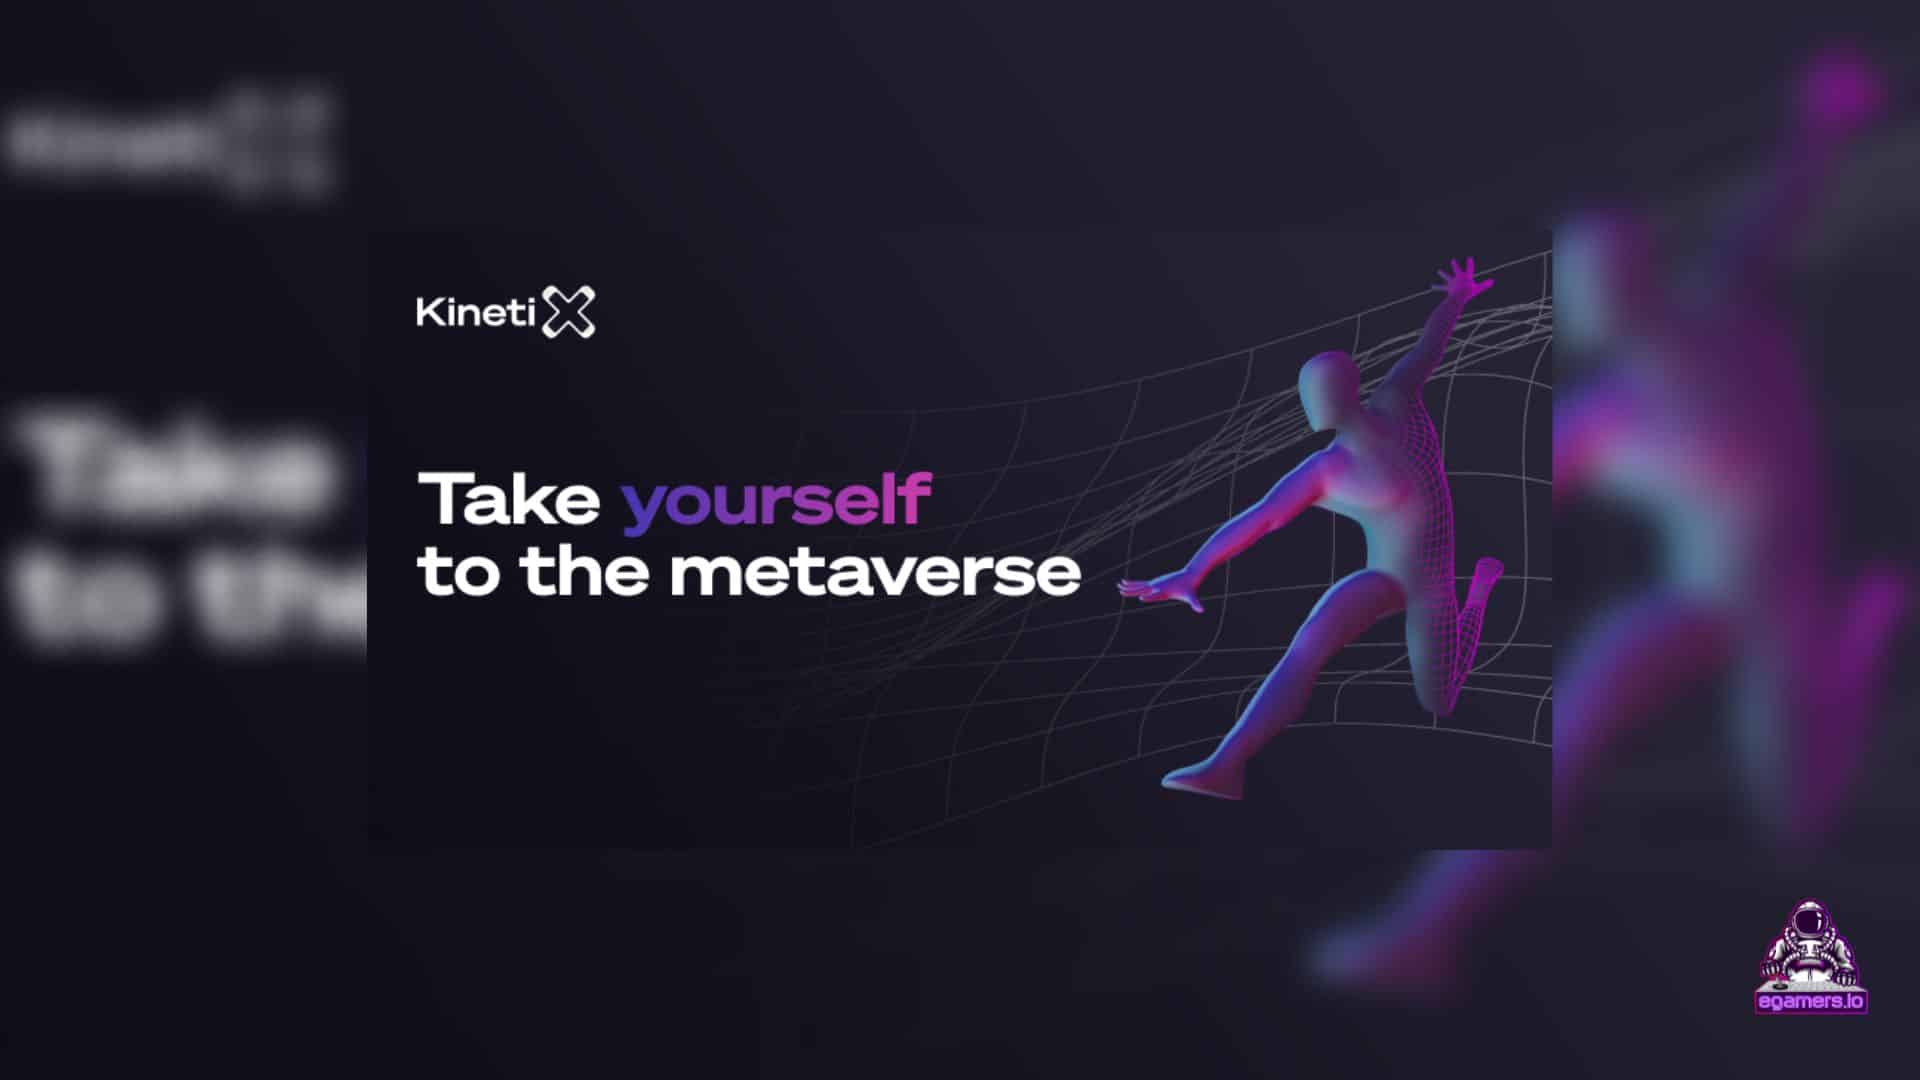 Kinetix Raises M to Promote User-Generated Content in The Metaverse